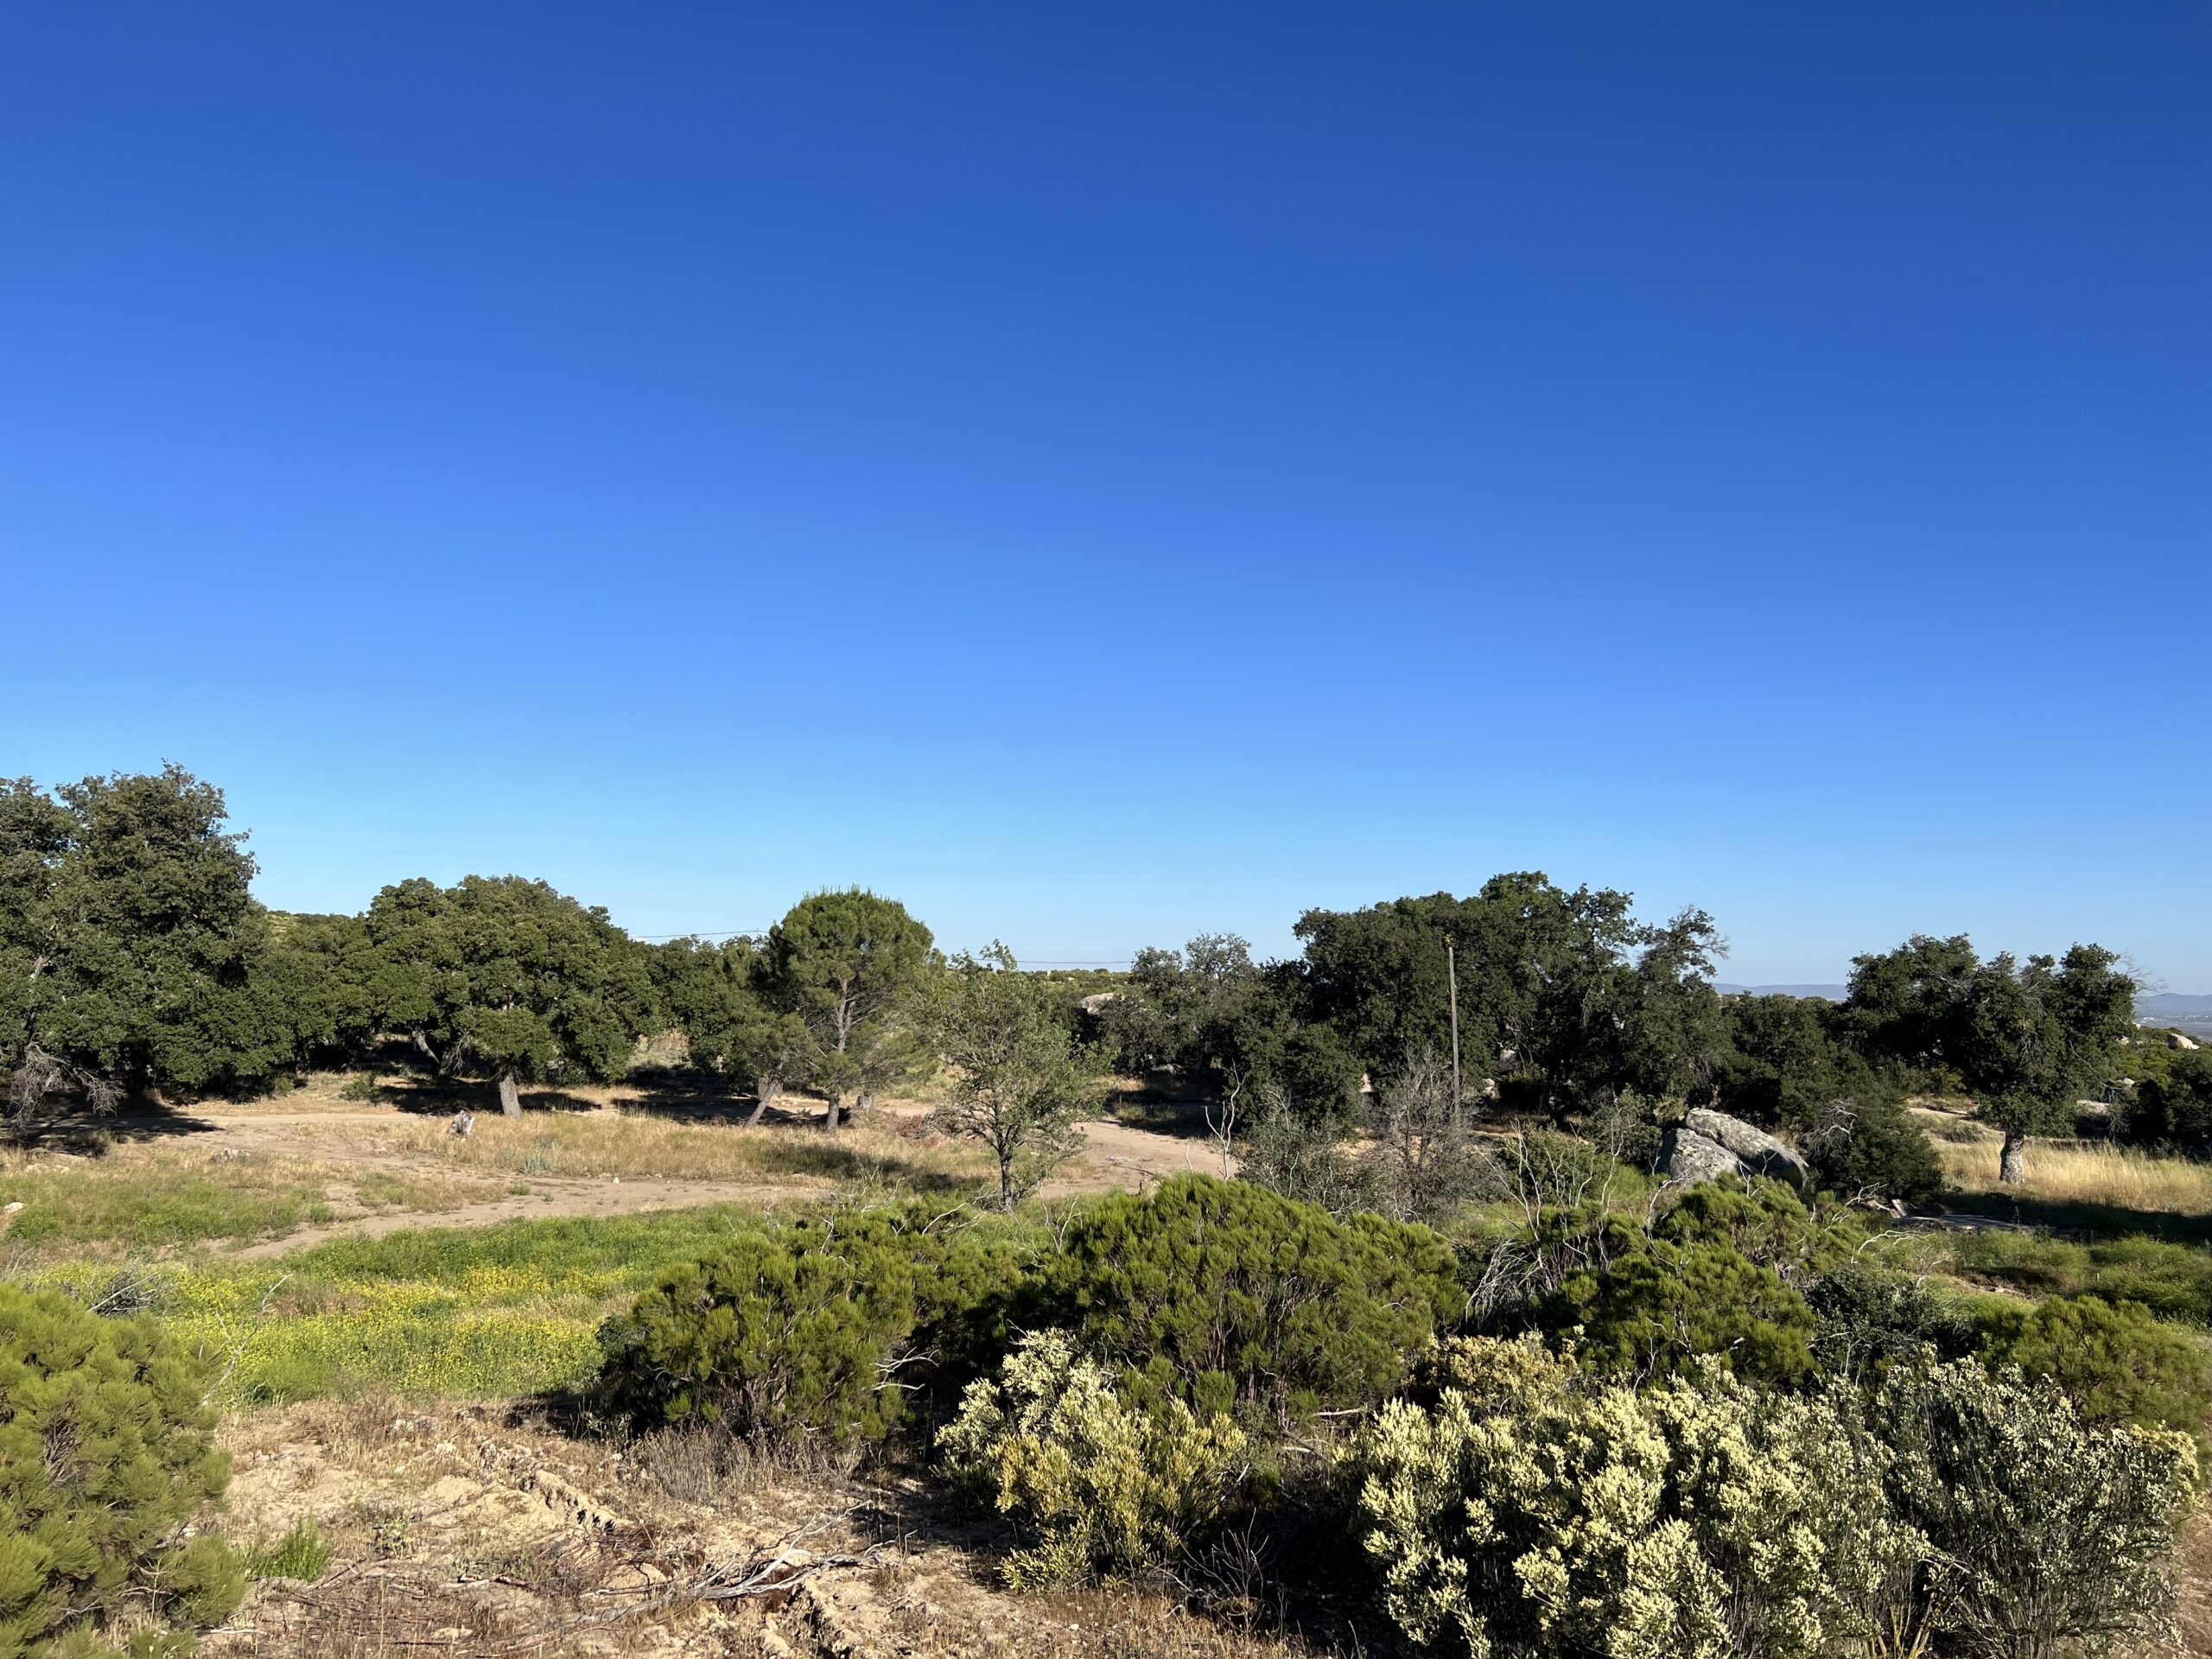 A serene landscape under a clear blue sky, with a mix of green shrubbery and trees scattered across dry, grassy terrain.